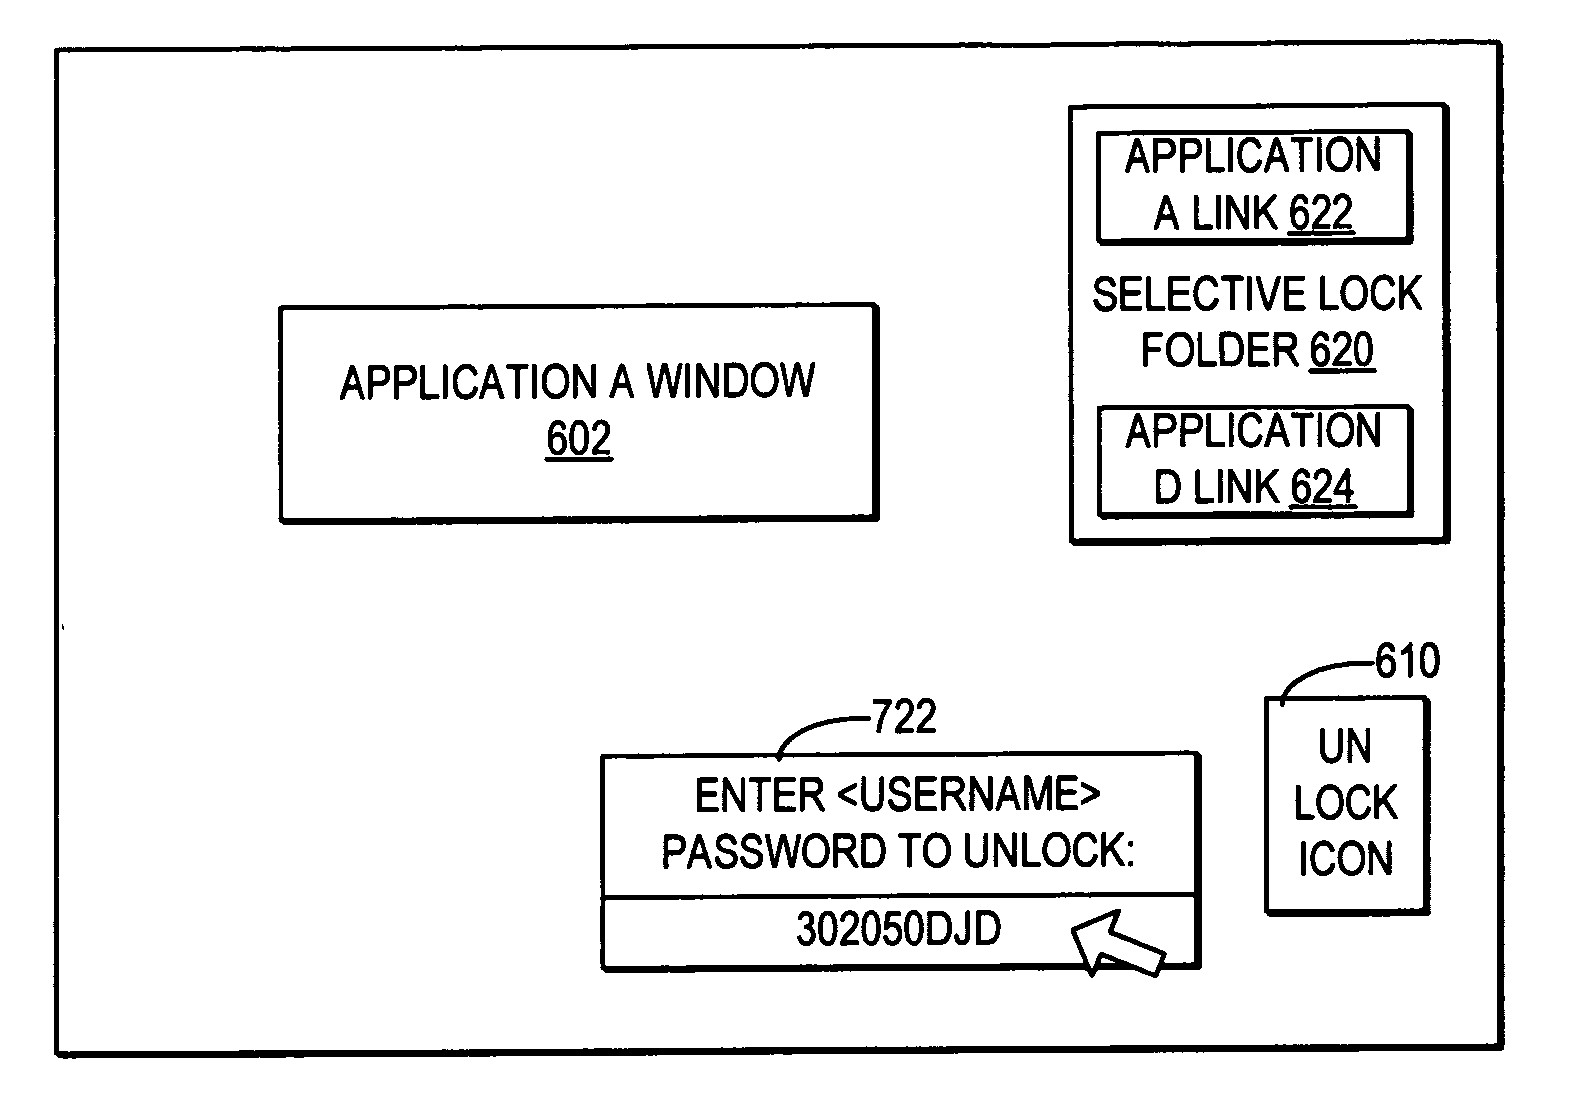 Allowing any computer users access to use only a selection of the available applications